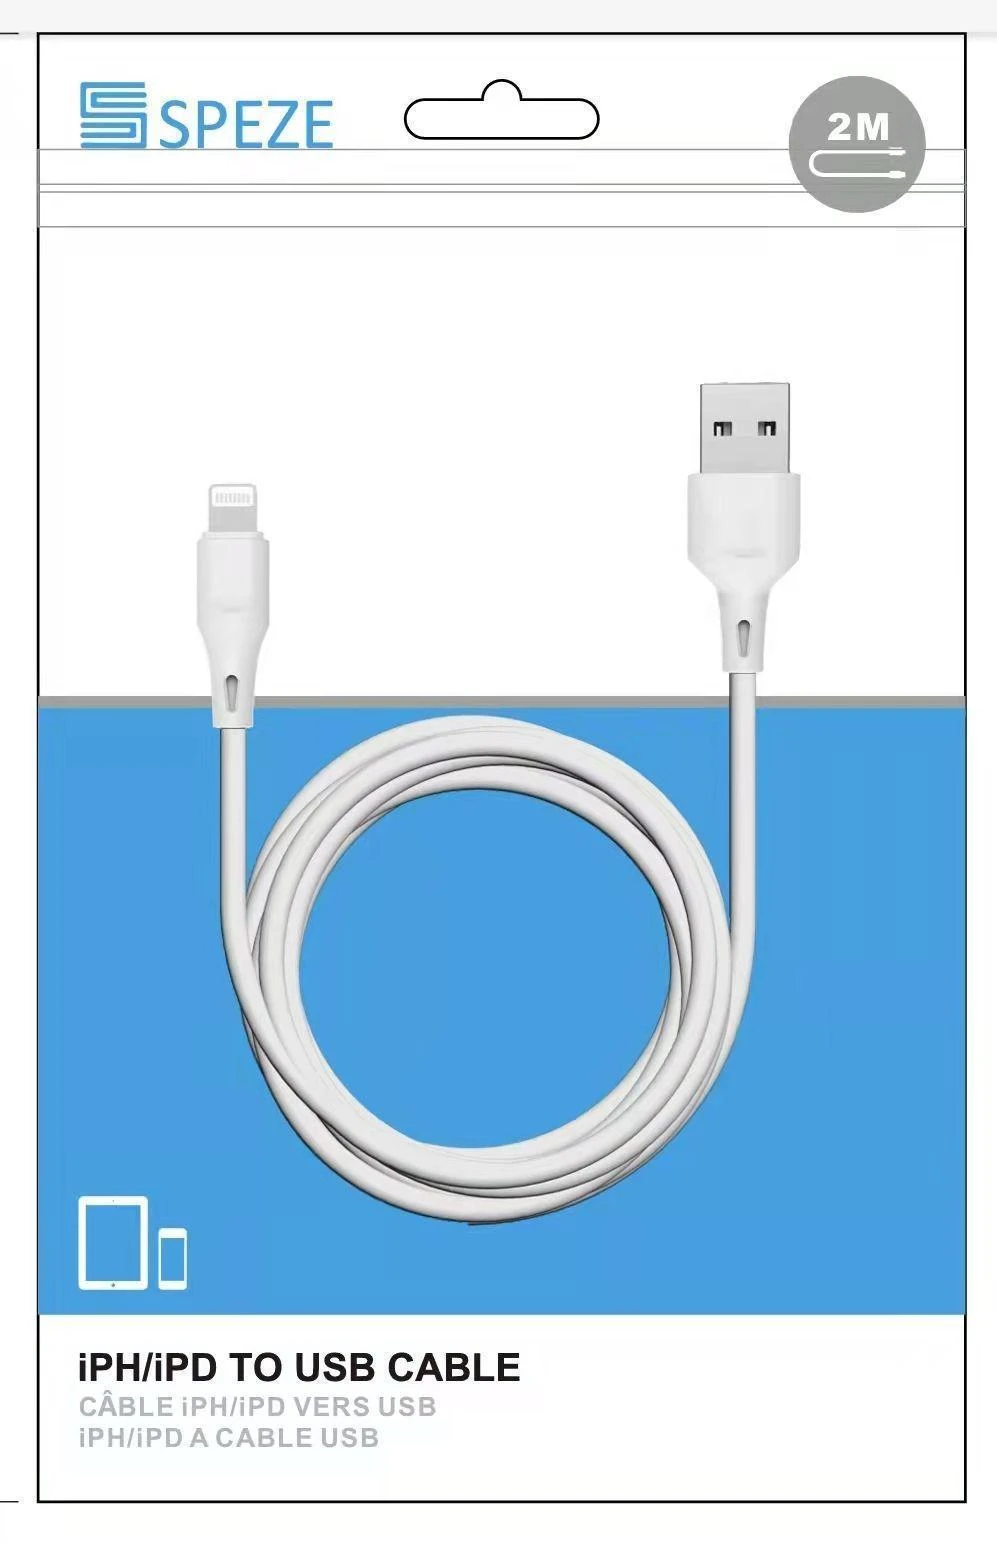 SPEZE IPHONE 2M CABLE WHITE